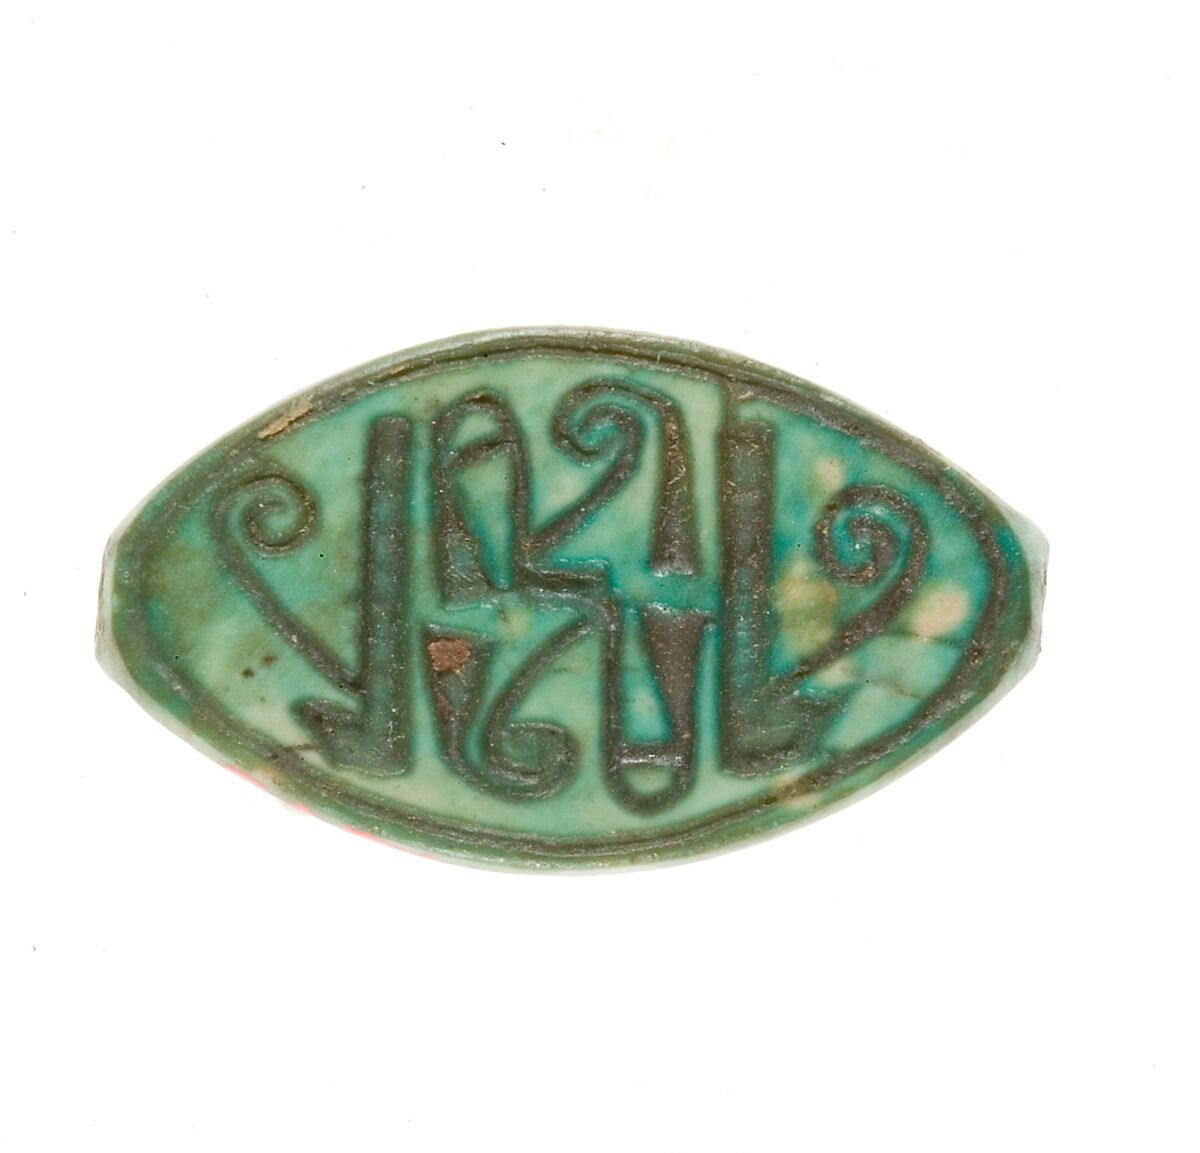 Cowroid Seal Amulet Inscribed with a Decorative Pattern, Steatite (glazed) 